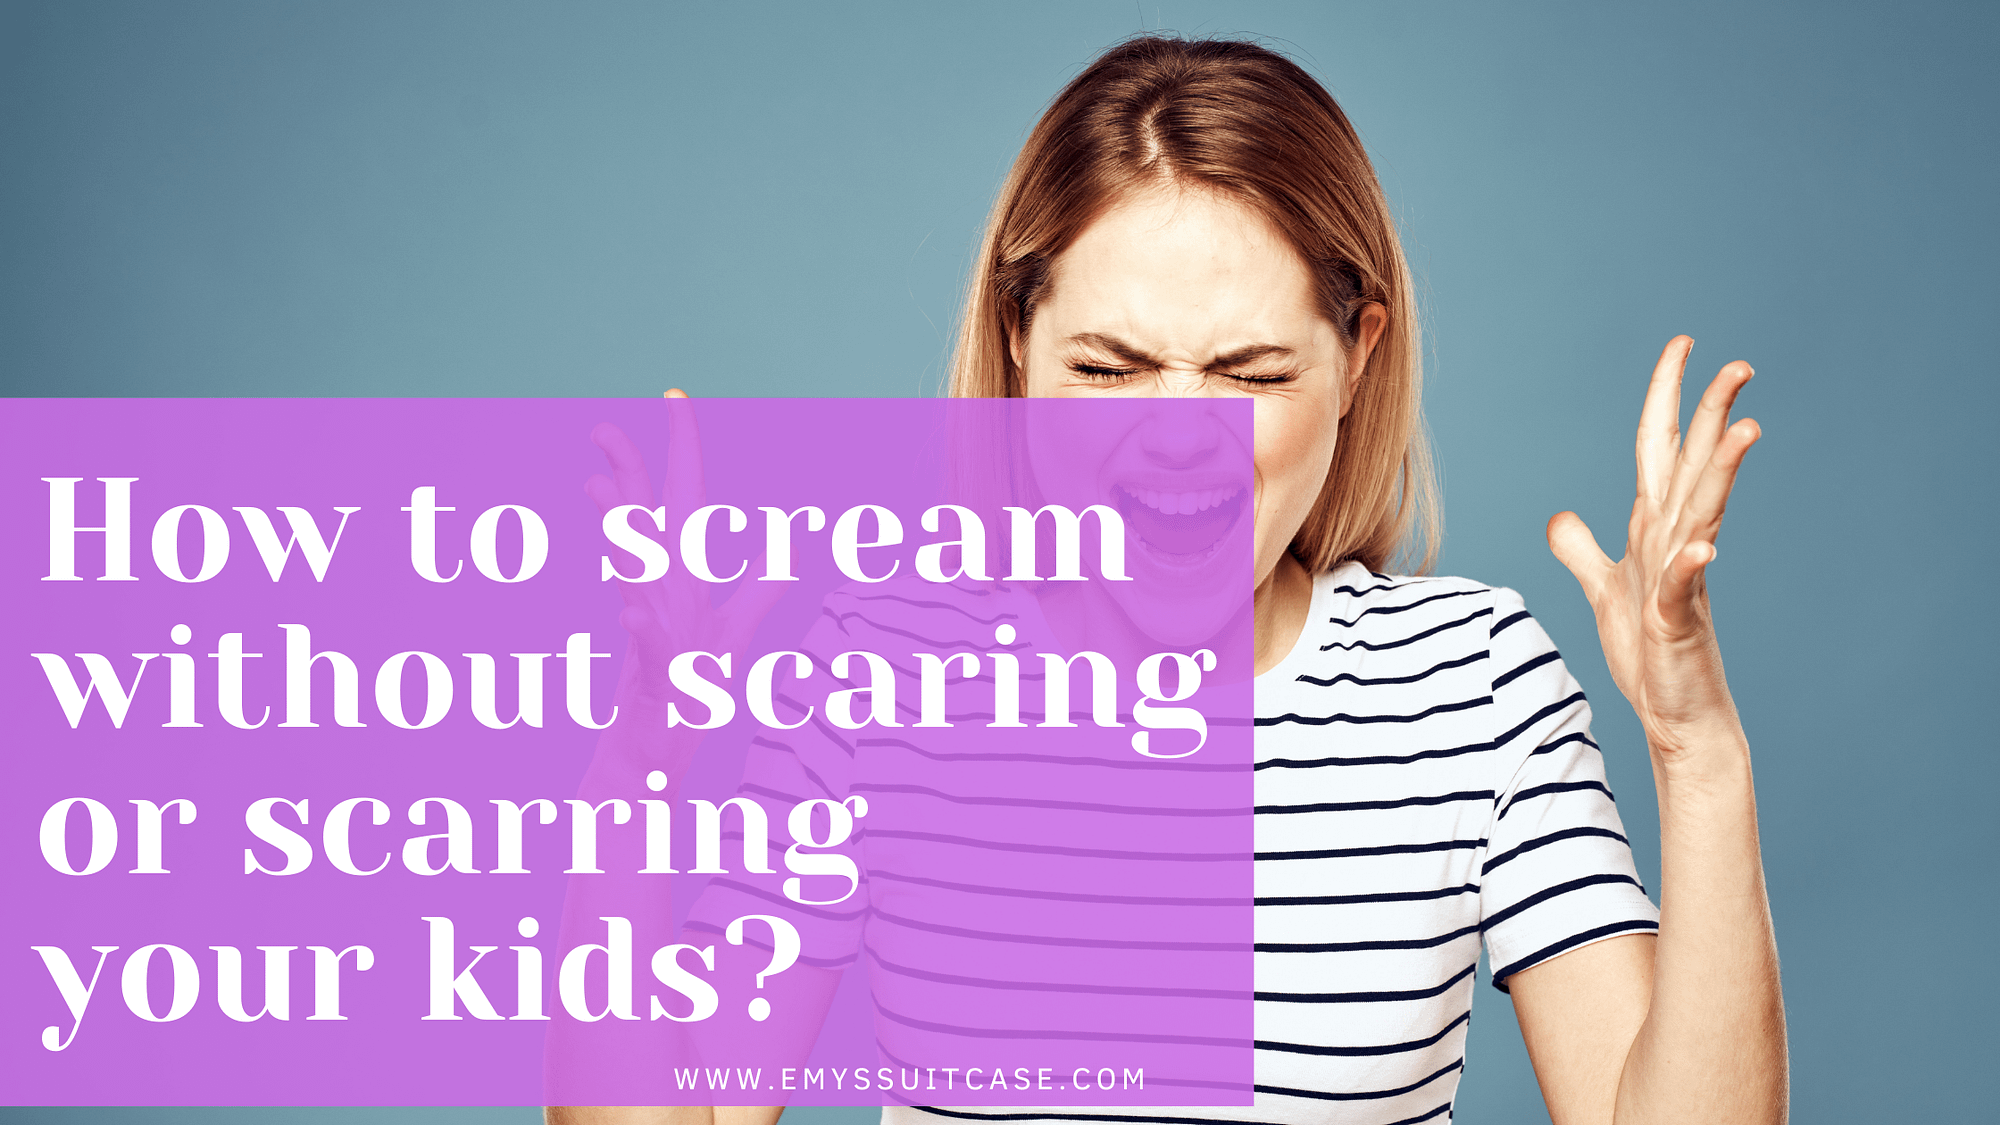 SCREAM WITHOUT scaring or SCARRING YOUR KIDS